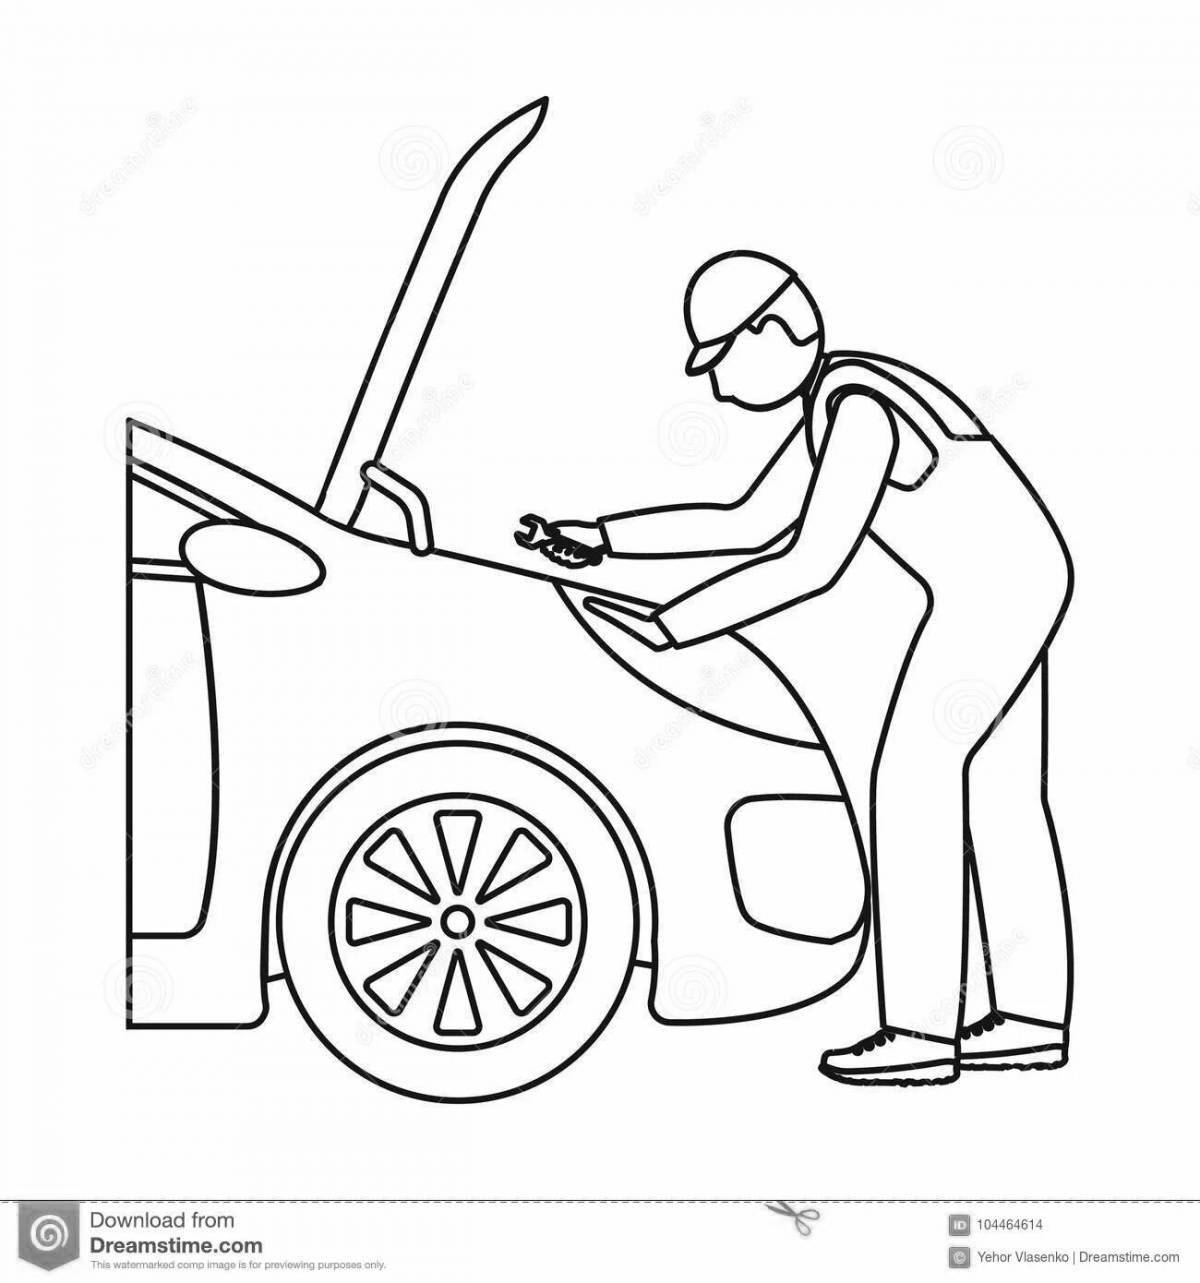 Glowing car mechanic coloring page for kids